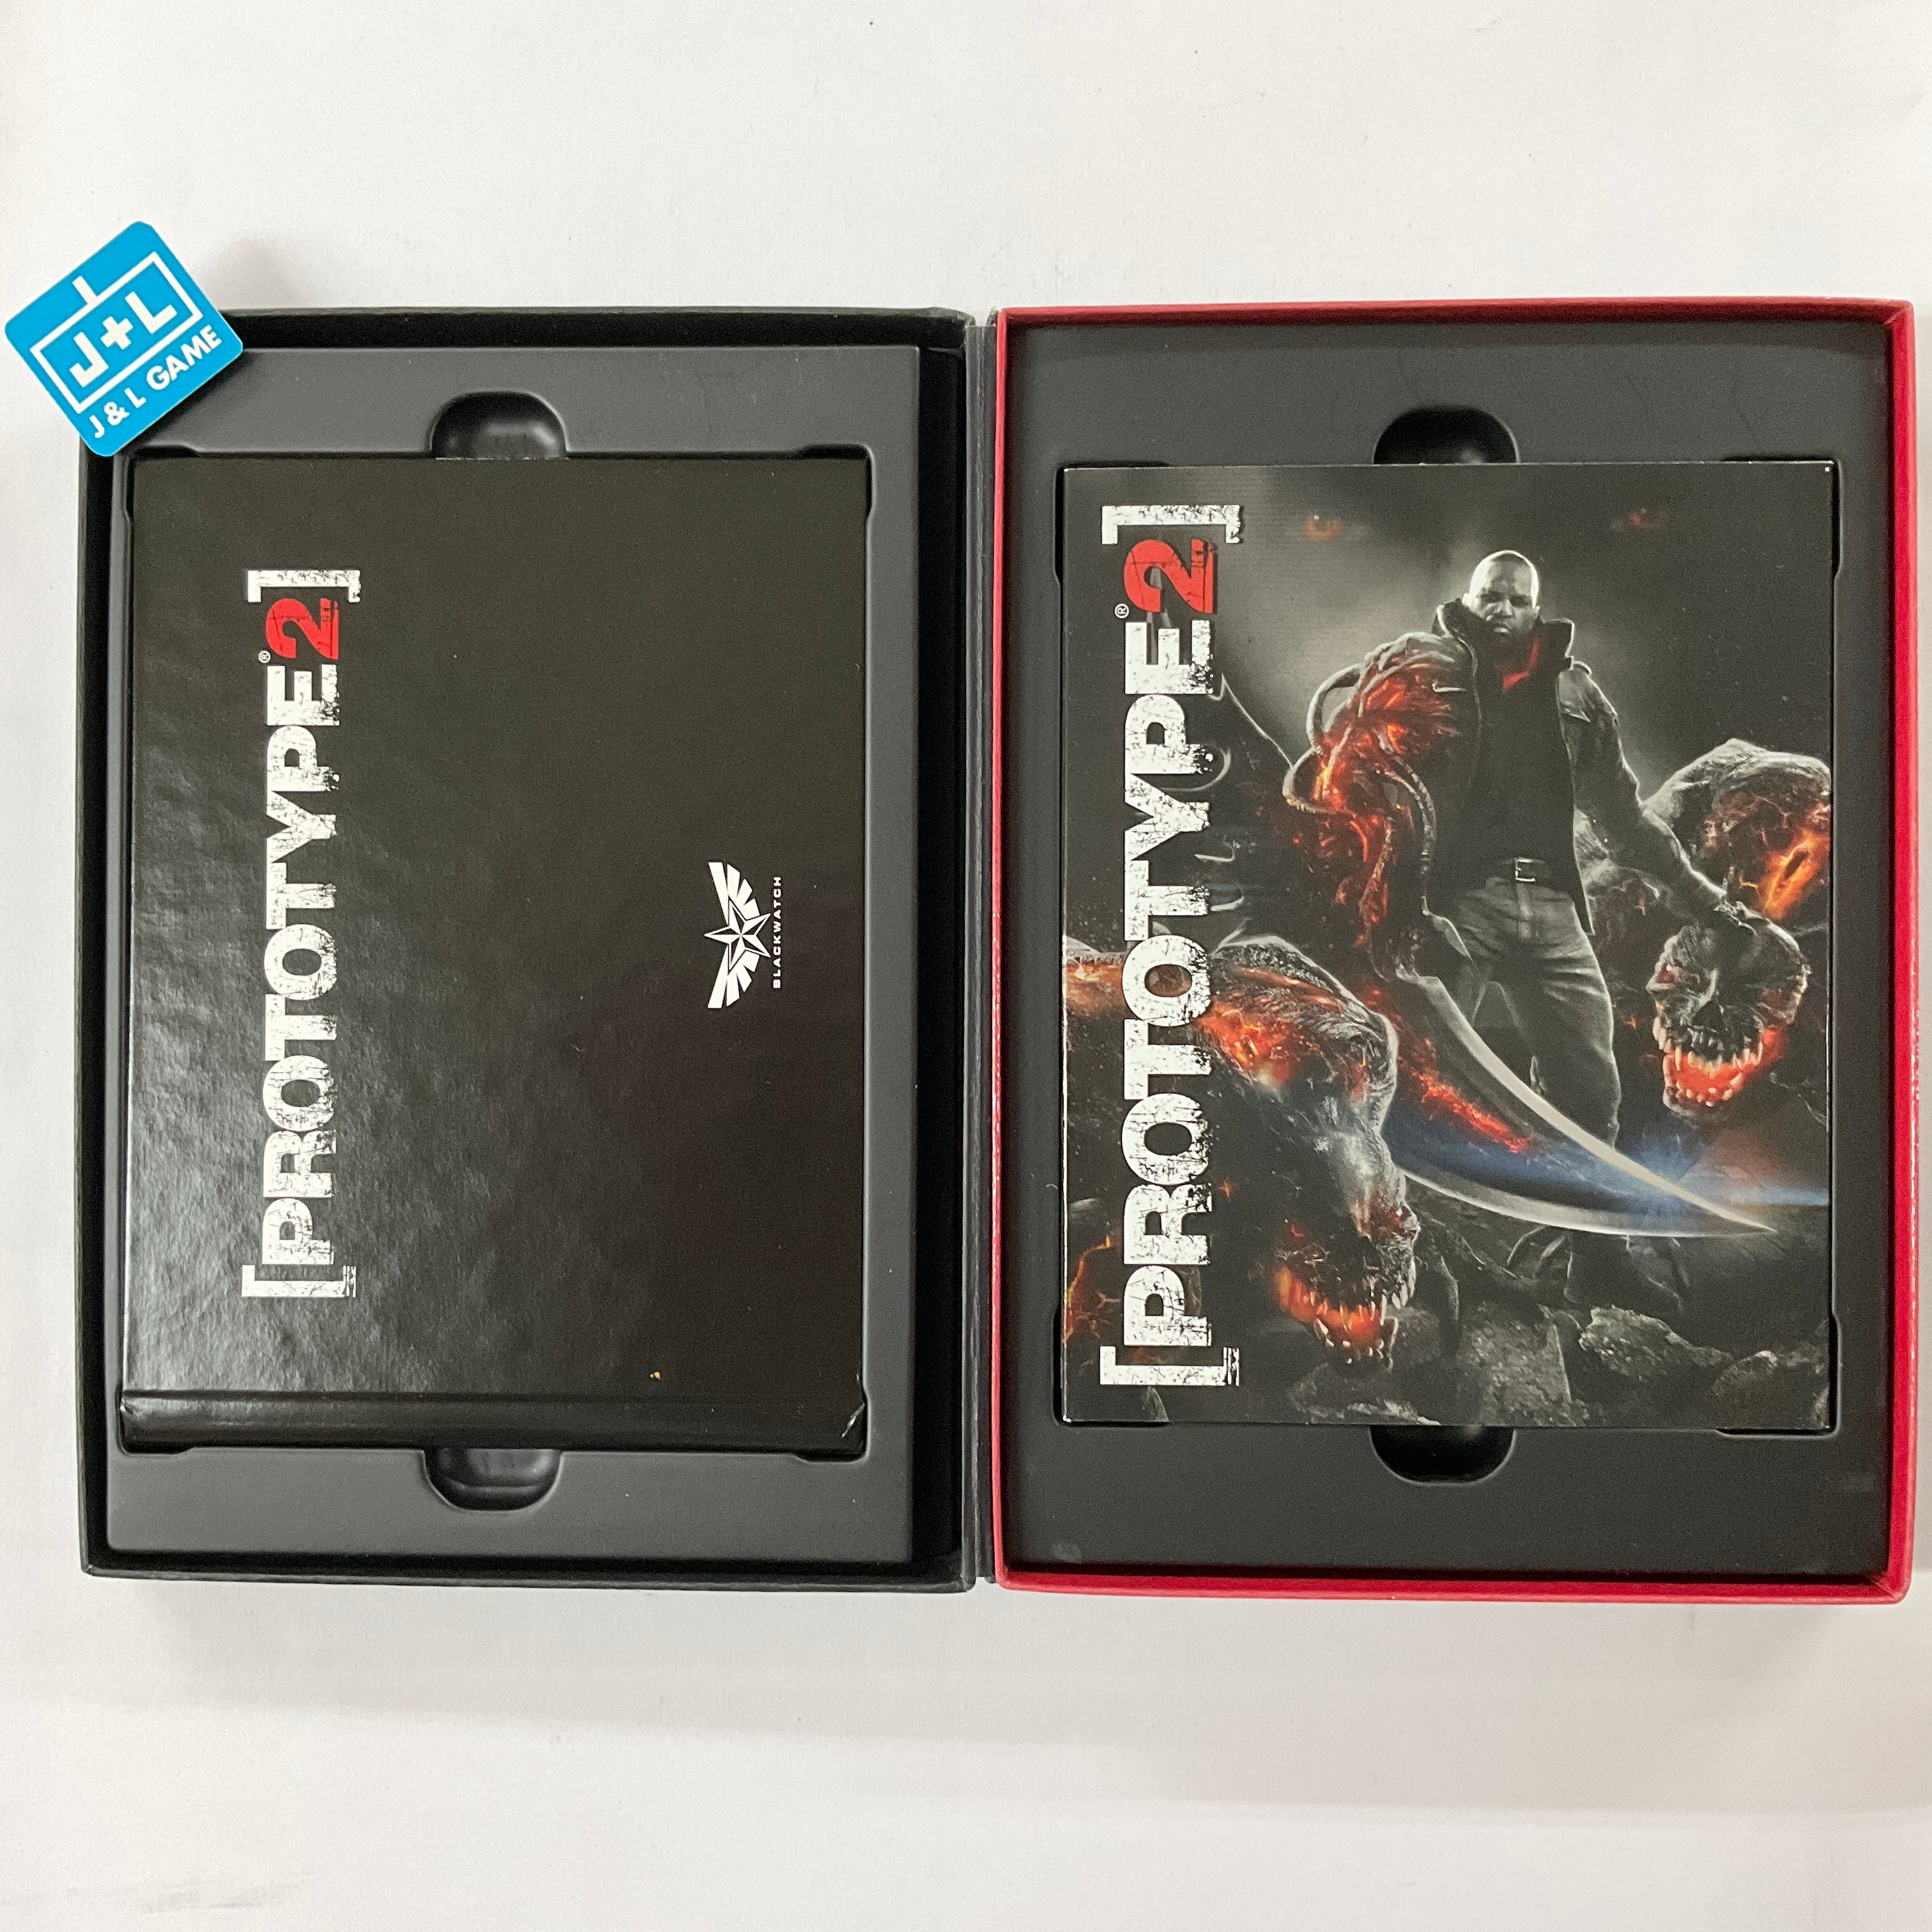 Prototype 2 (Blackwatch Collector's Edition) - (PS3) Playstation 3 [Pre-Owned] Video Games ACTIVISION   